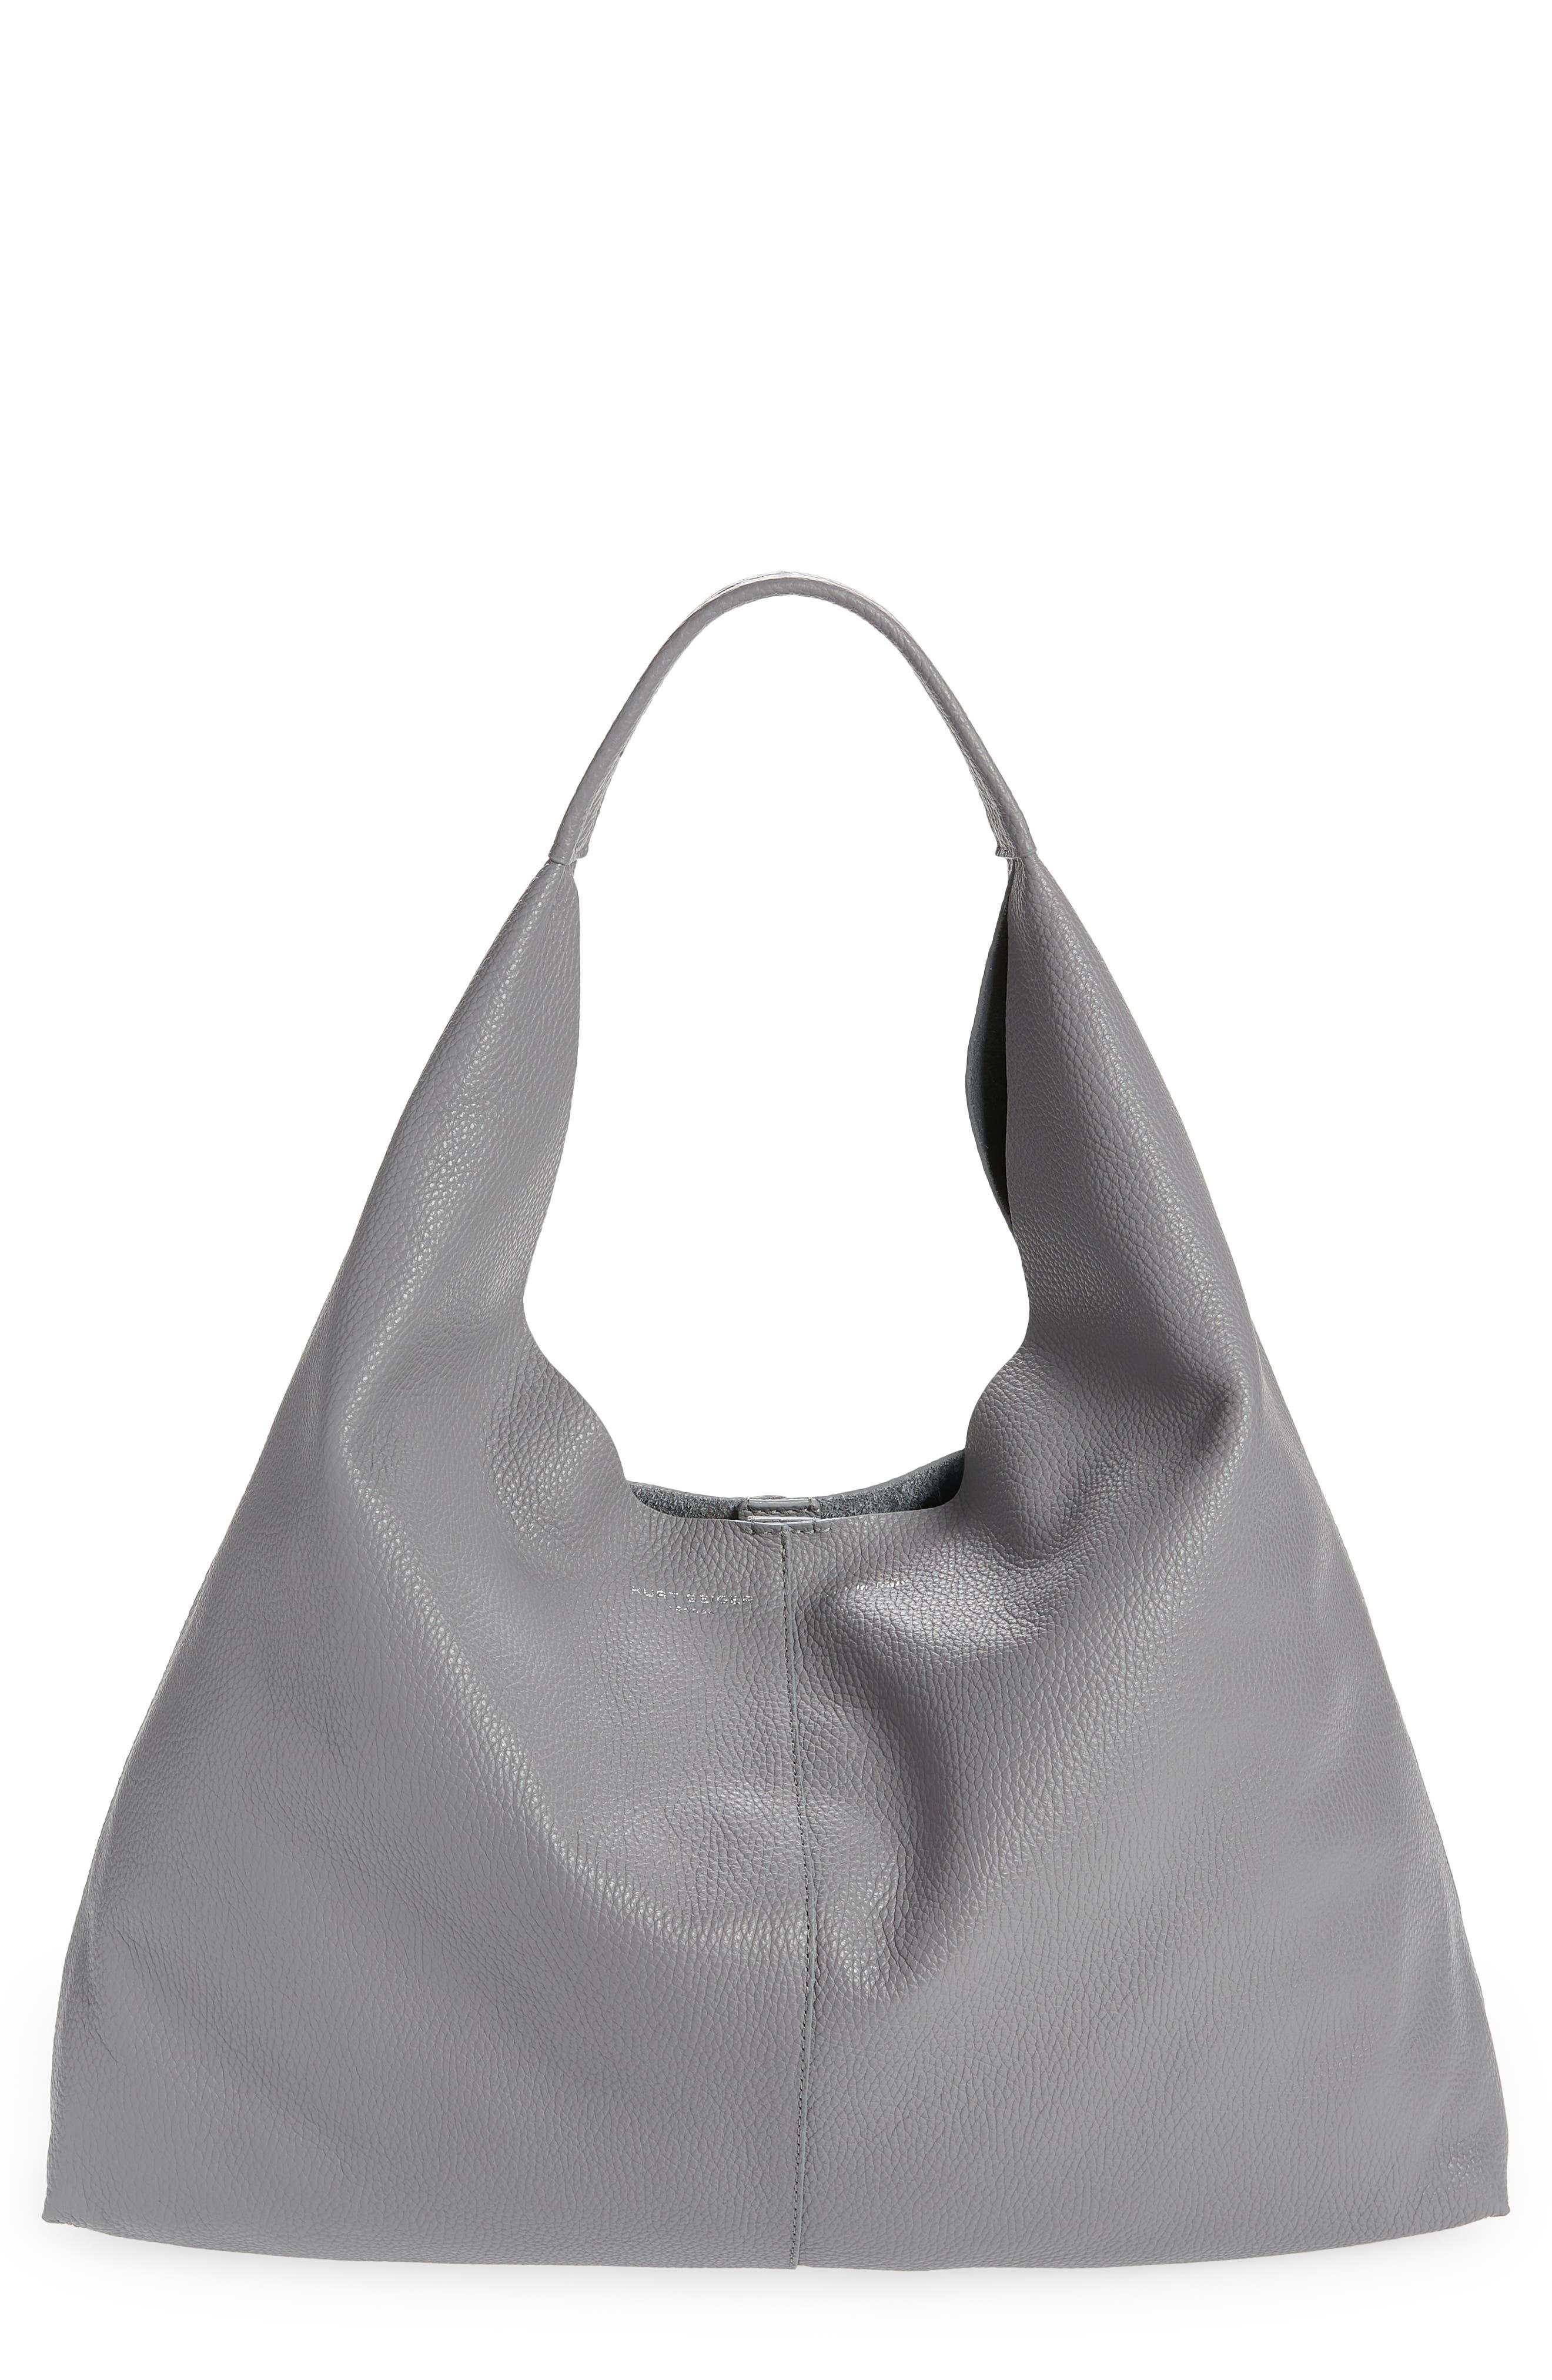 Sexy Dance Hobo Bags for Women Soft Faux Leather India | Ubuy